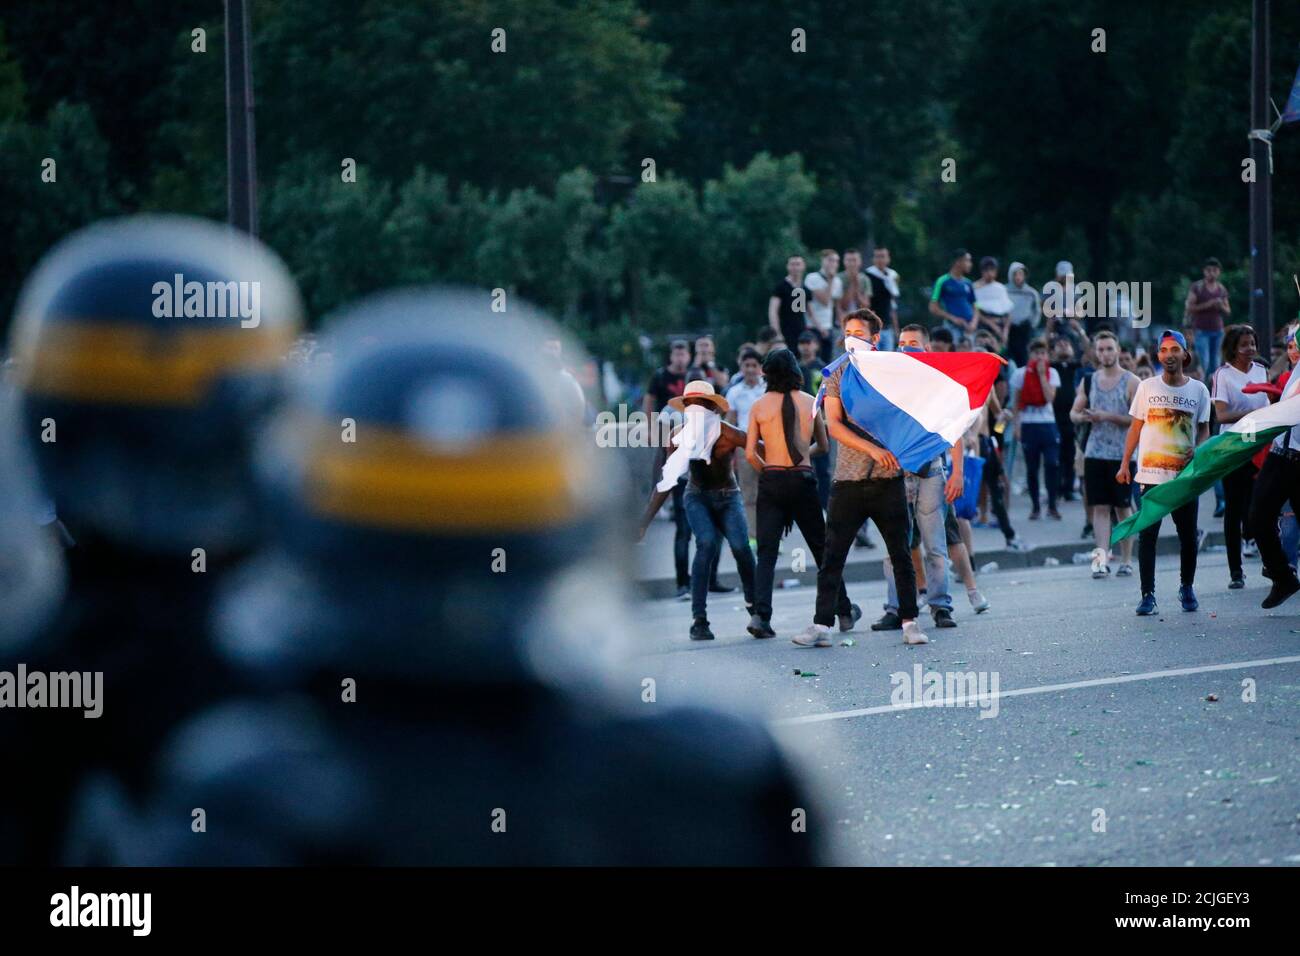 French CRS riot police hold a position during clashes near the Paris fan zone during the Portugal v France EURO 2016 final soccer match in Paris, France, July 10, 2016. French police fired tear gas to disperse dozens of people trying to enter the 'fan zone' at the foot of the Eiffel Tower to watch the final of the Euro 2016 soccer tournament on Sunday evening, to prevent overcrowding.      REUTERS/Stephane Mahe Stock Photo